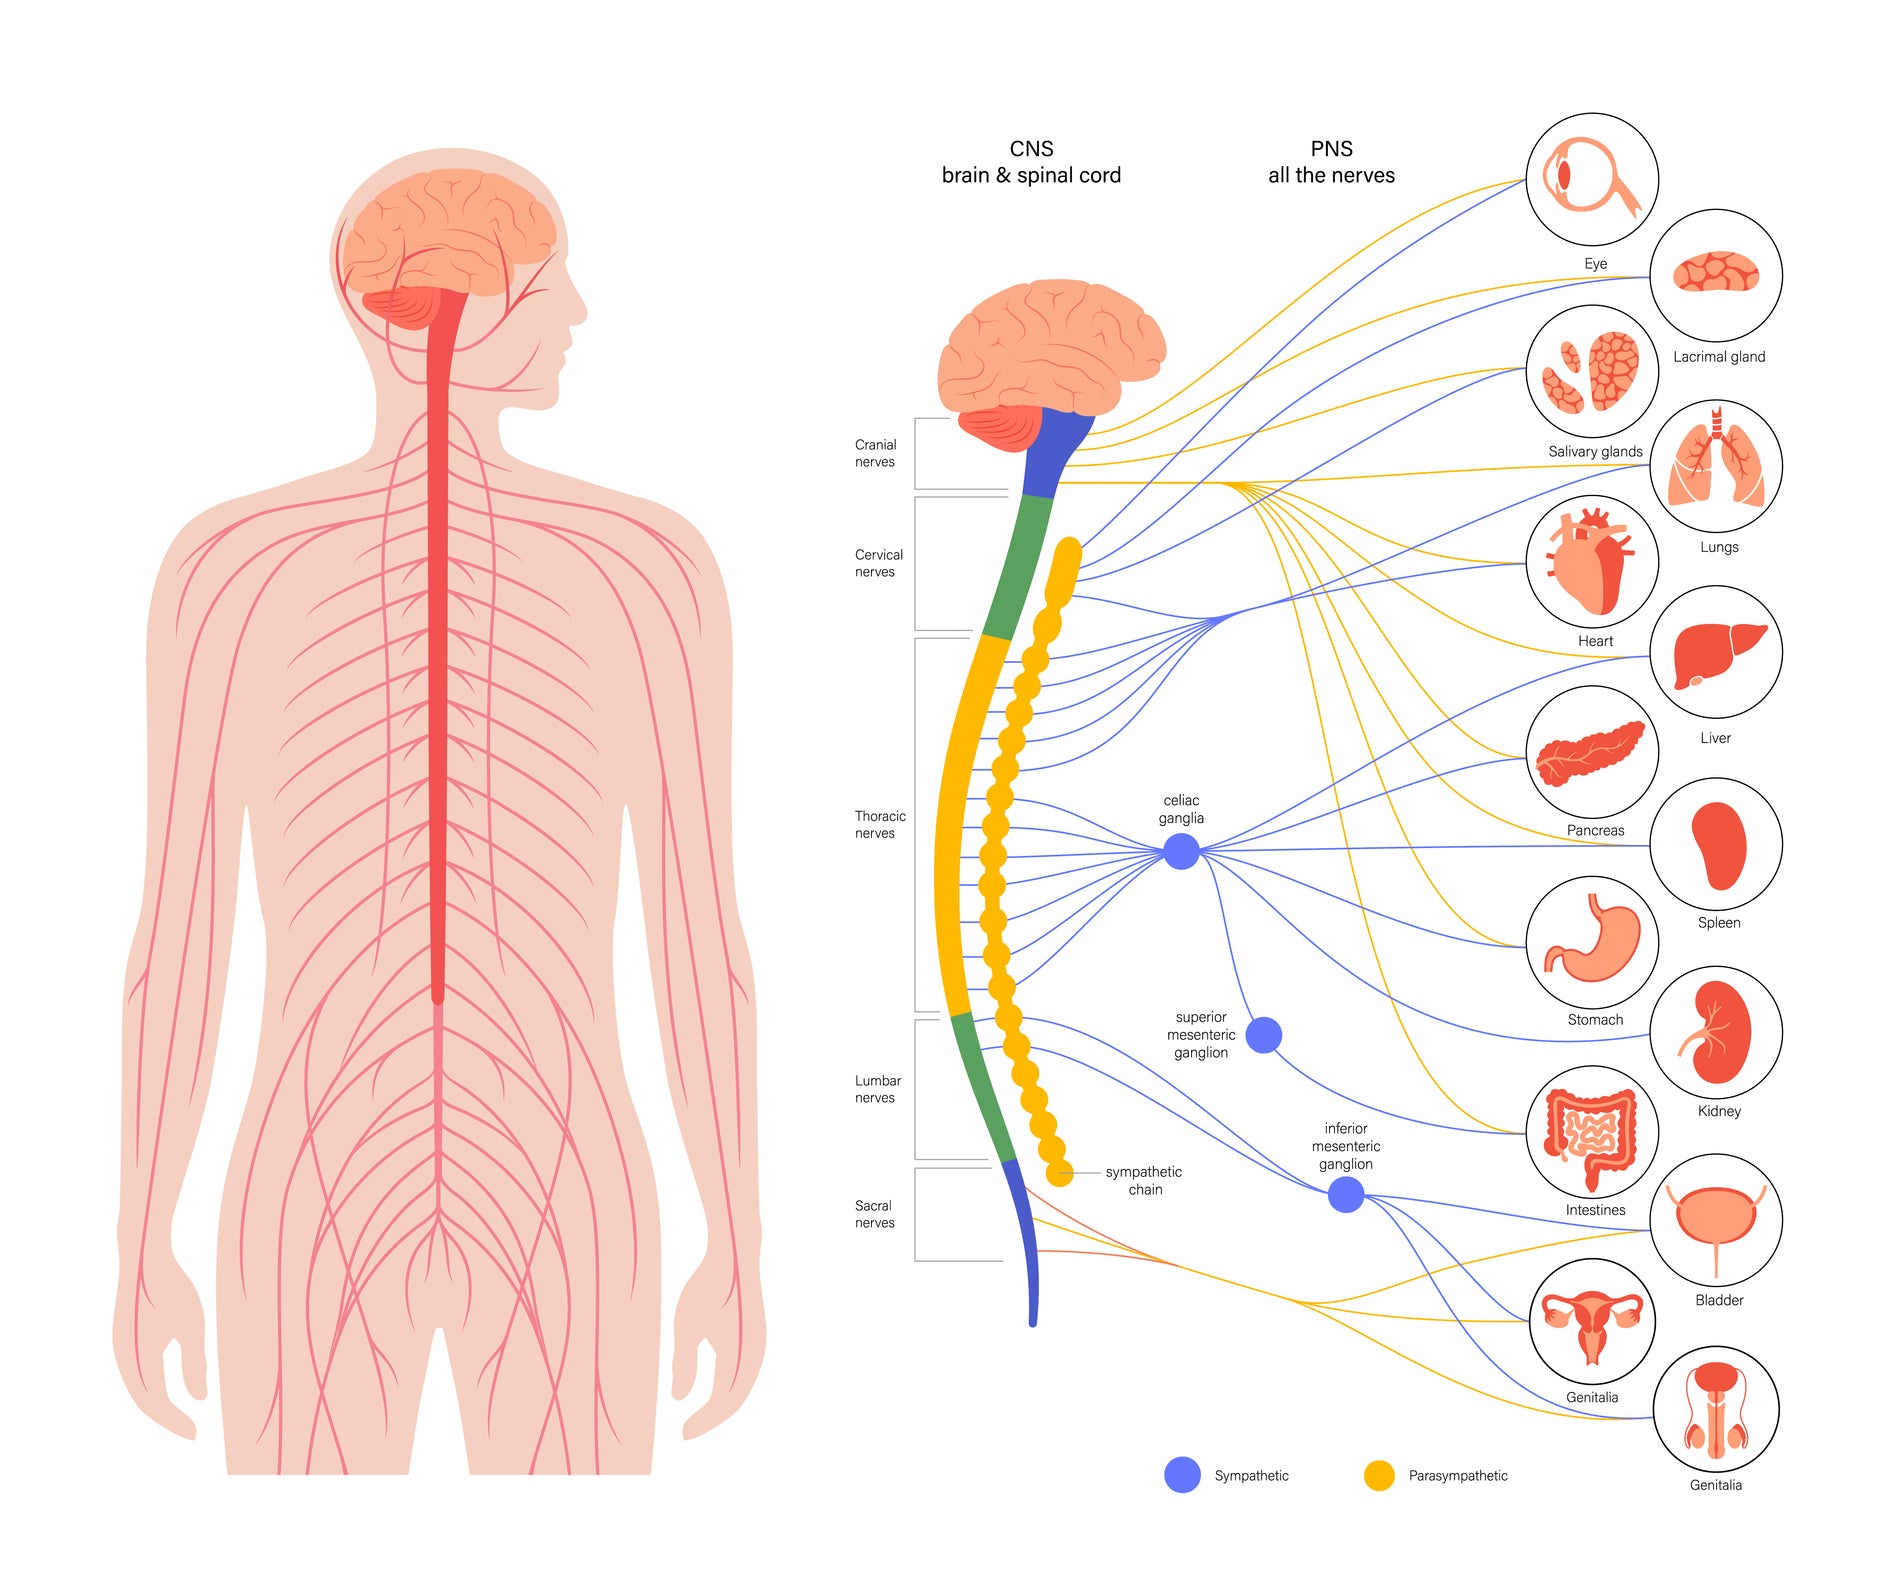 A graphic showing which parts of the body are controlled by different nerves.